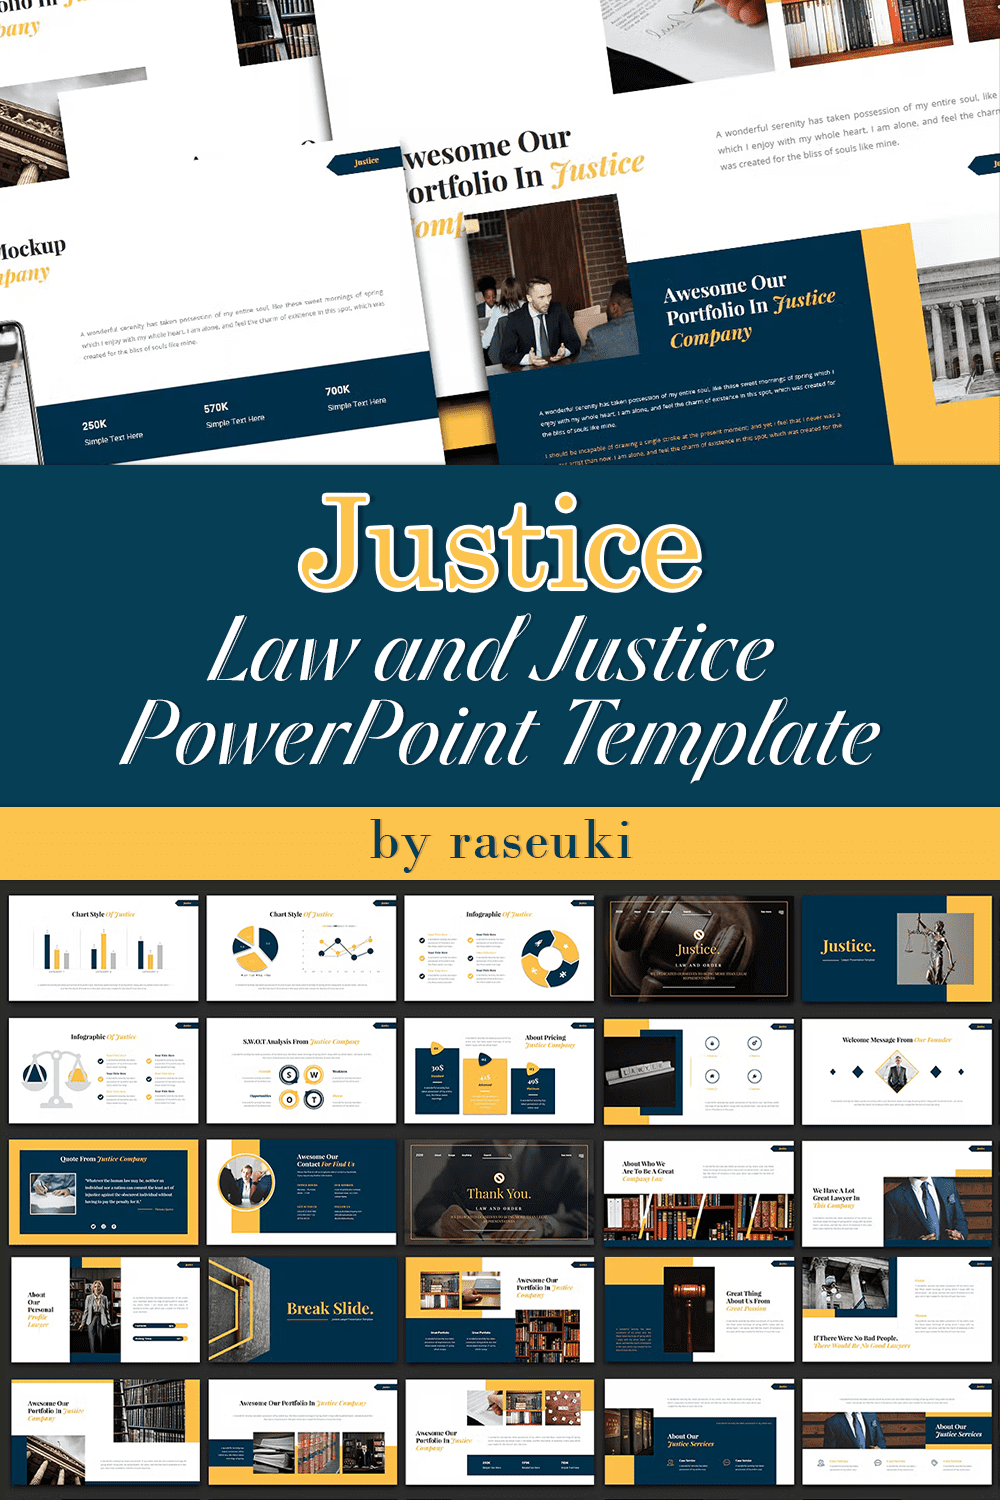 Justice law and justice powerpoint template of pinterest.